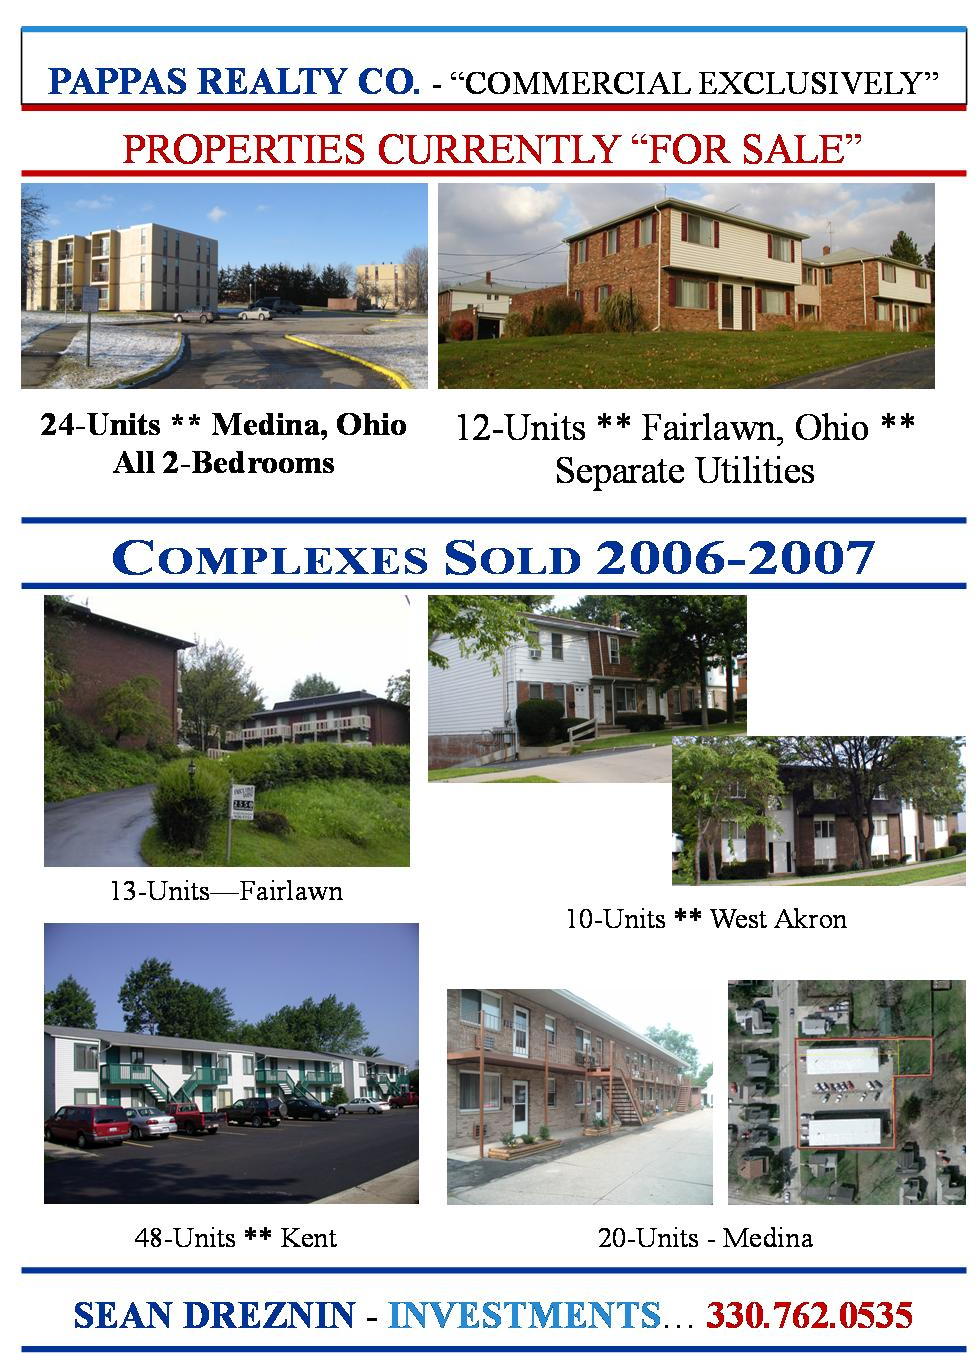 [sold+data+sheet+for+marketing+-+Comparables.jpg]